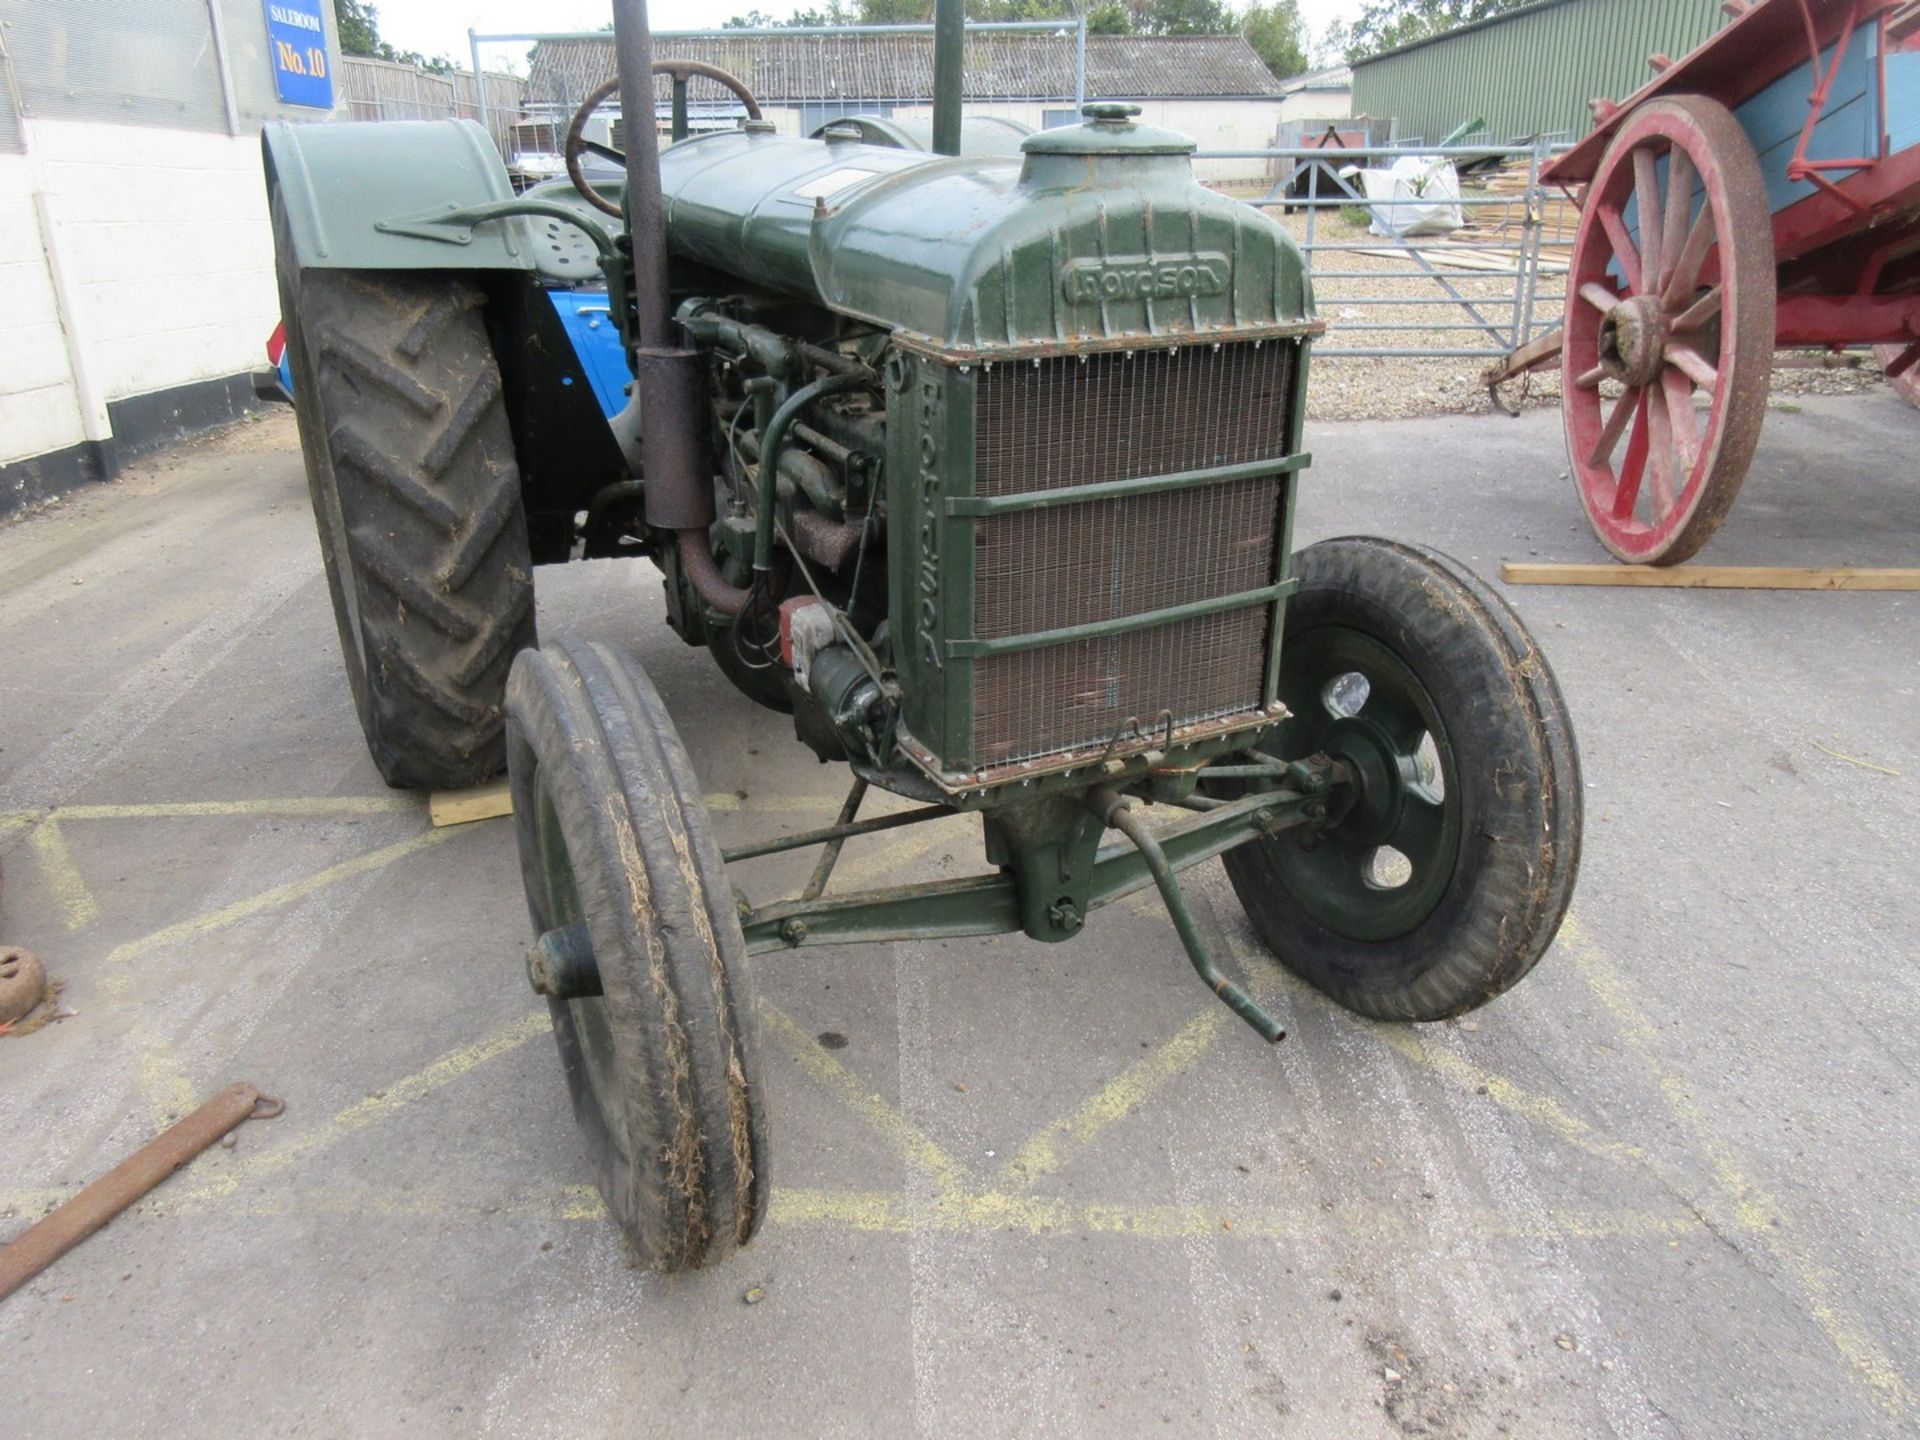 Fordson standard vintage tractor, together with various accessories spanners etc. A nice looking - Image 4 of 9